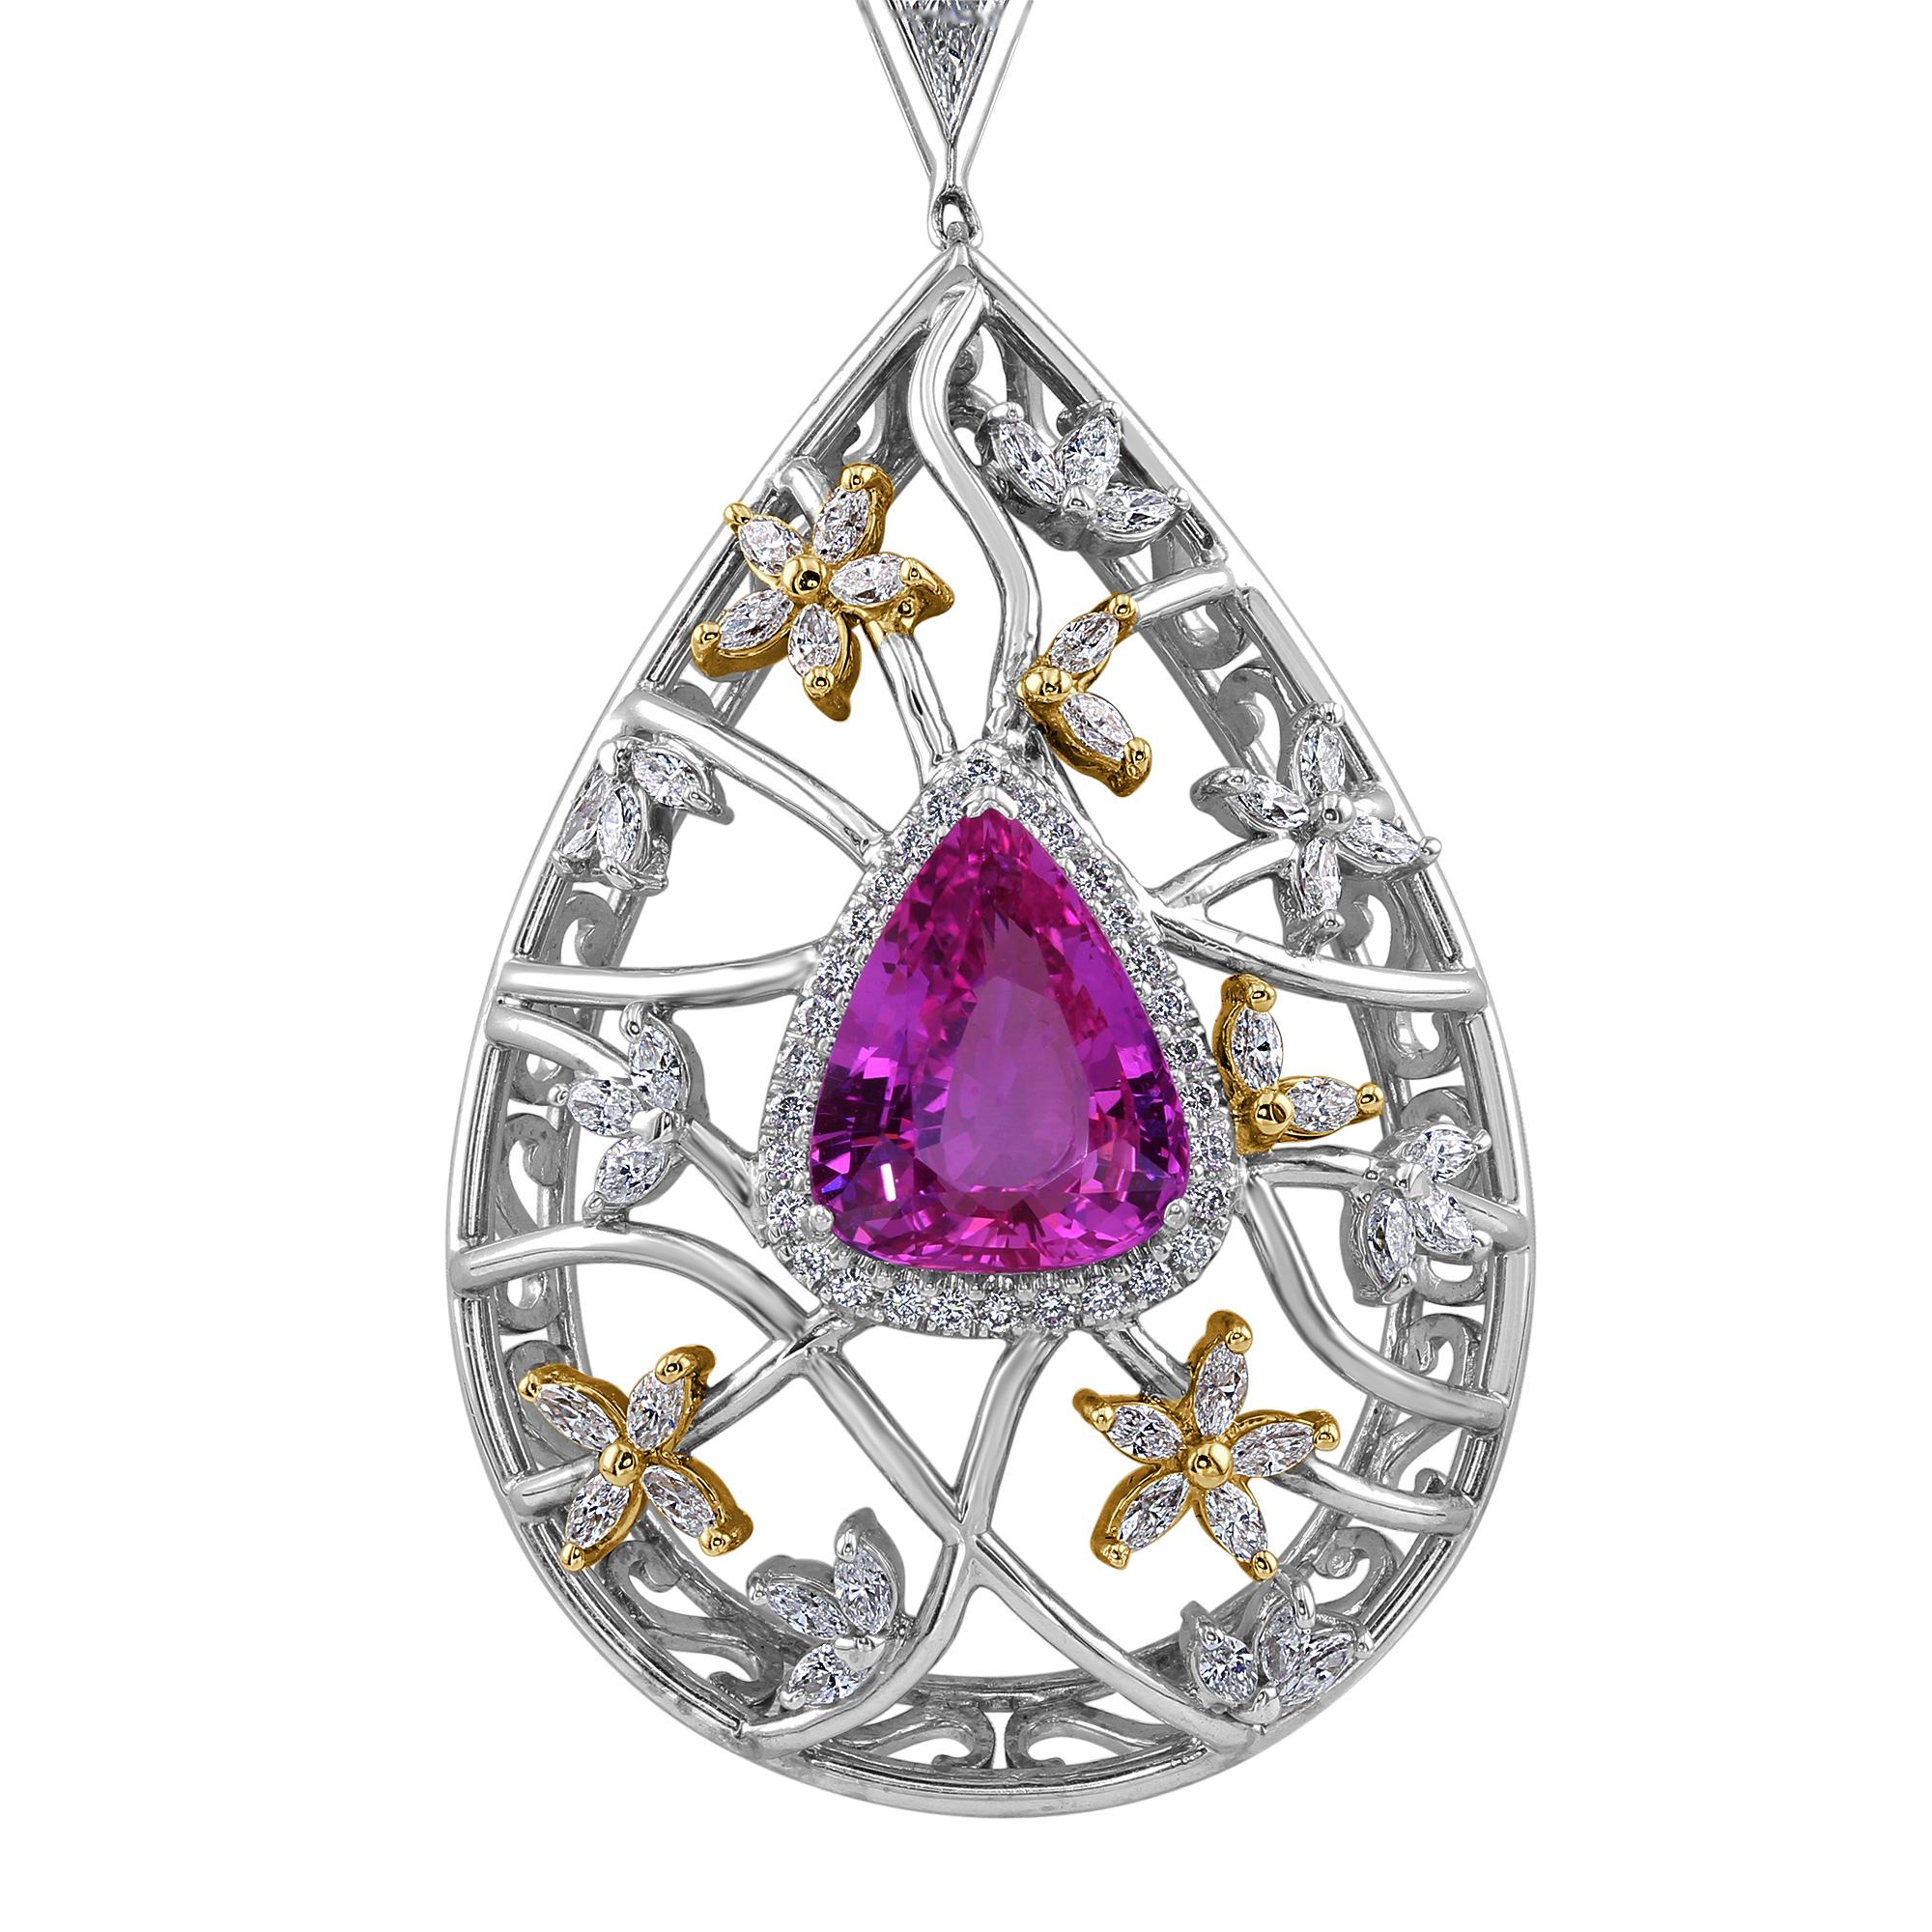 GIA Certified 7.07 carat Pear-shape pink sapphire, gorgeously embellished with intricate floral designs, hanging on alternating round and kite shaped diamonds.

Total diamond weight: 6.29 carat

Clasp: Tongue in box clasp with safety hatch.

Length: